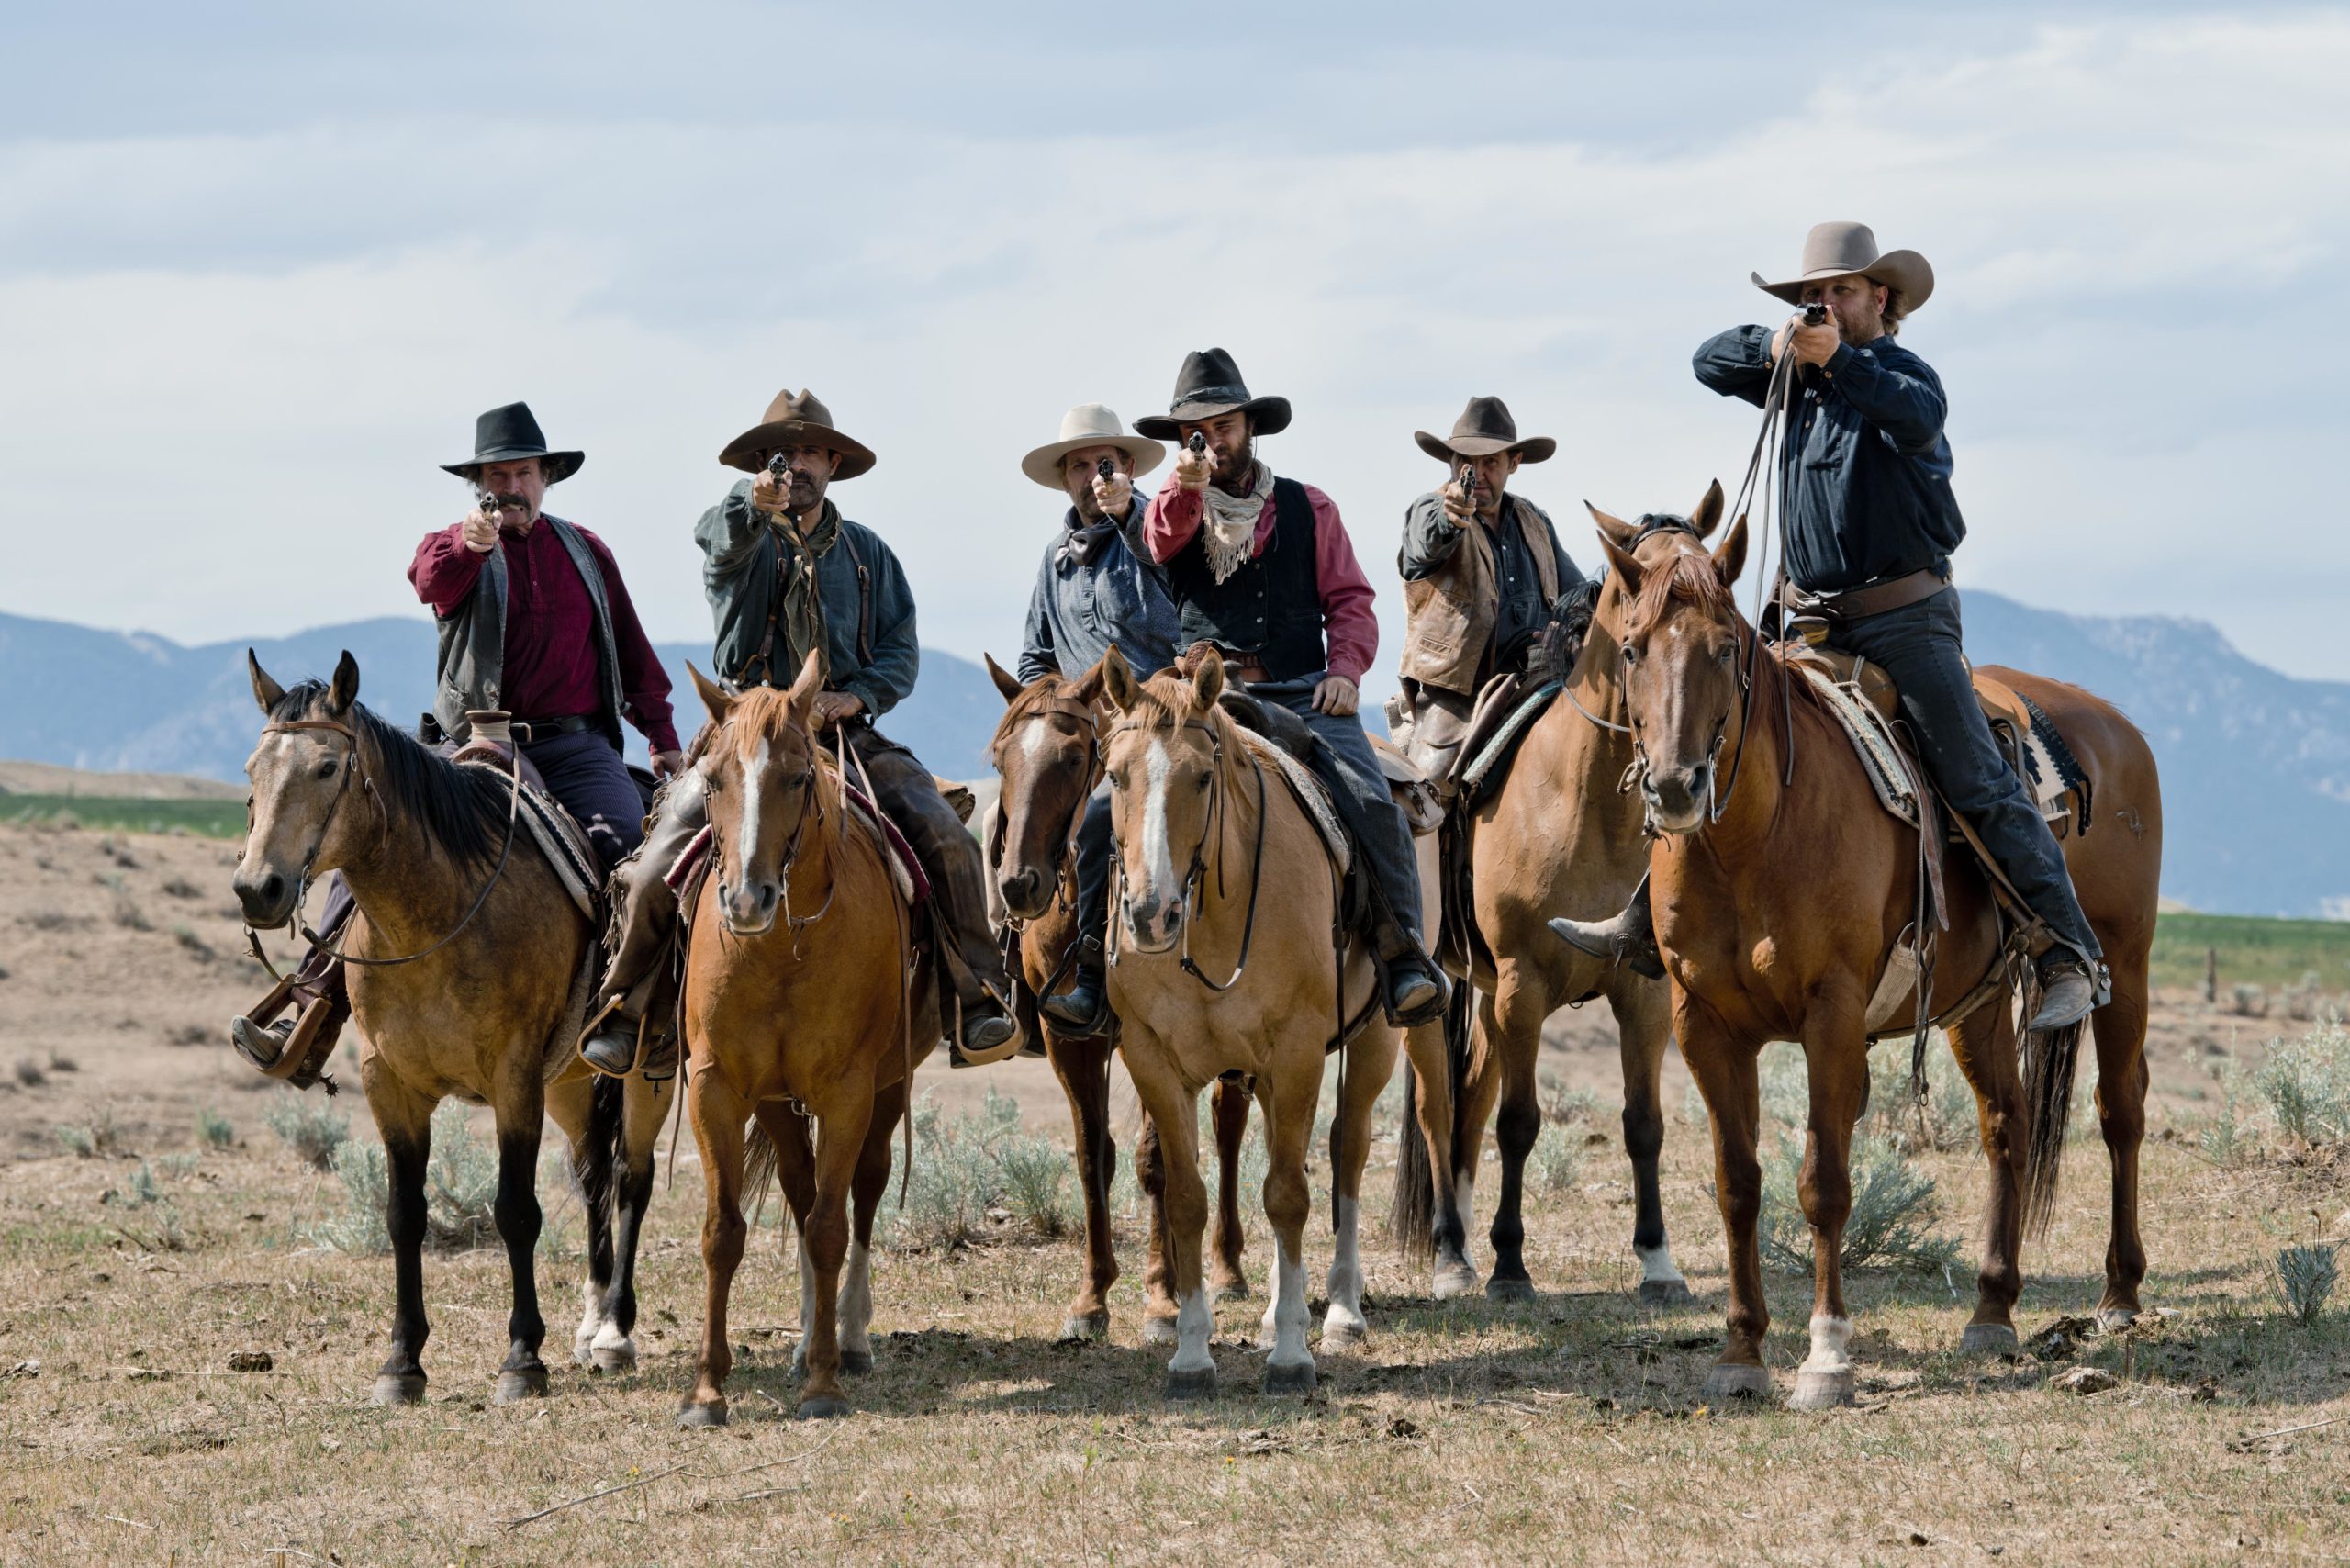 Who Catches The Bullet? An EXCLUISVE CLIP From The Western Catch The Bullet